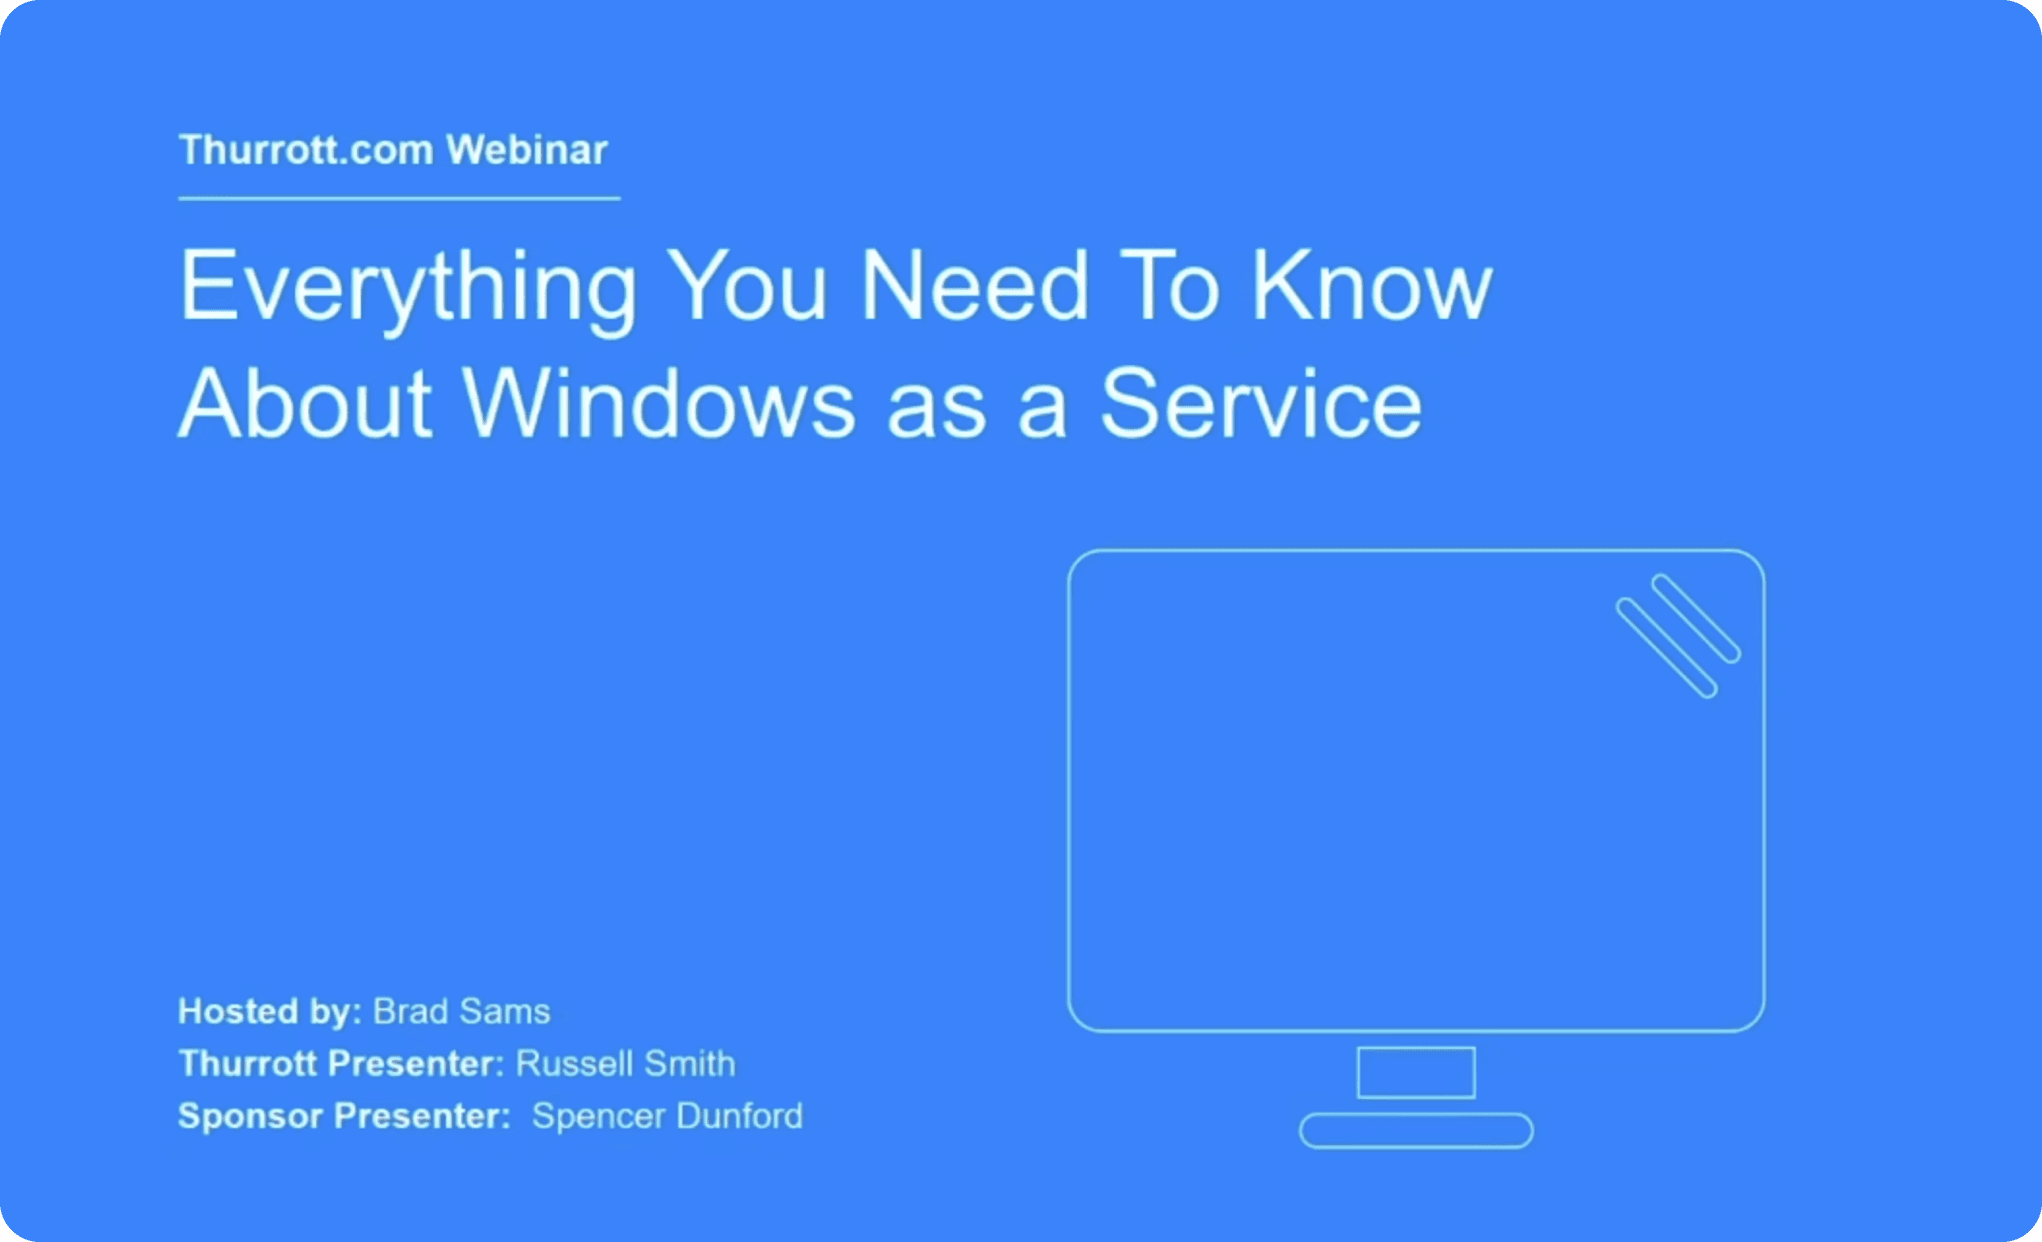 What you need to know: Windows as a service